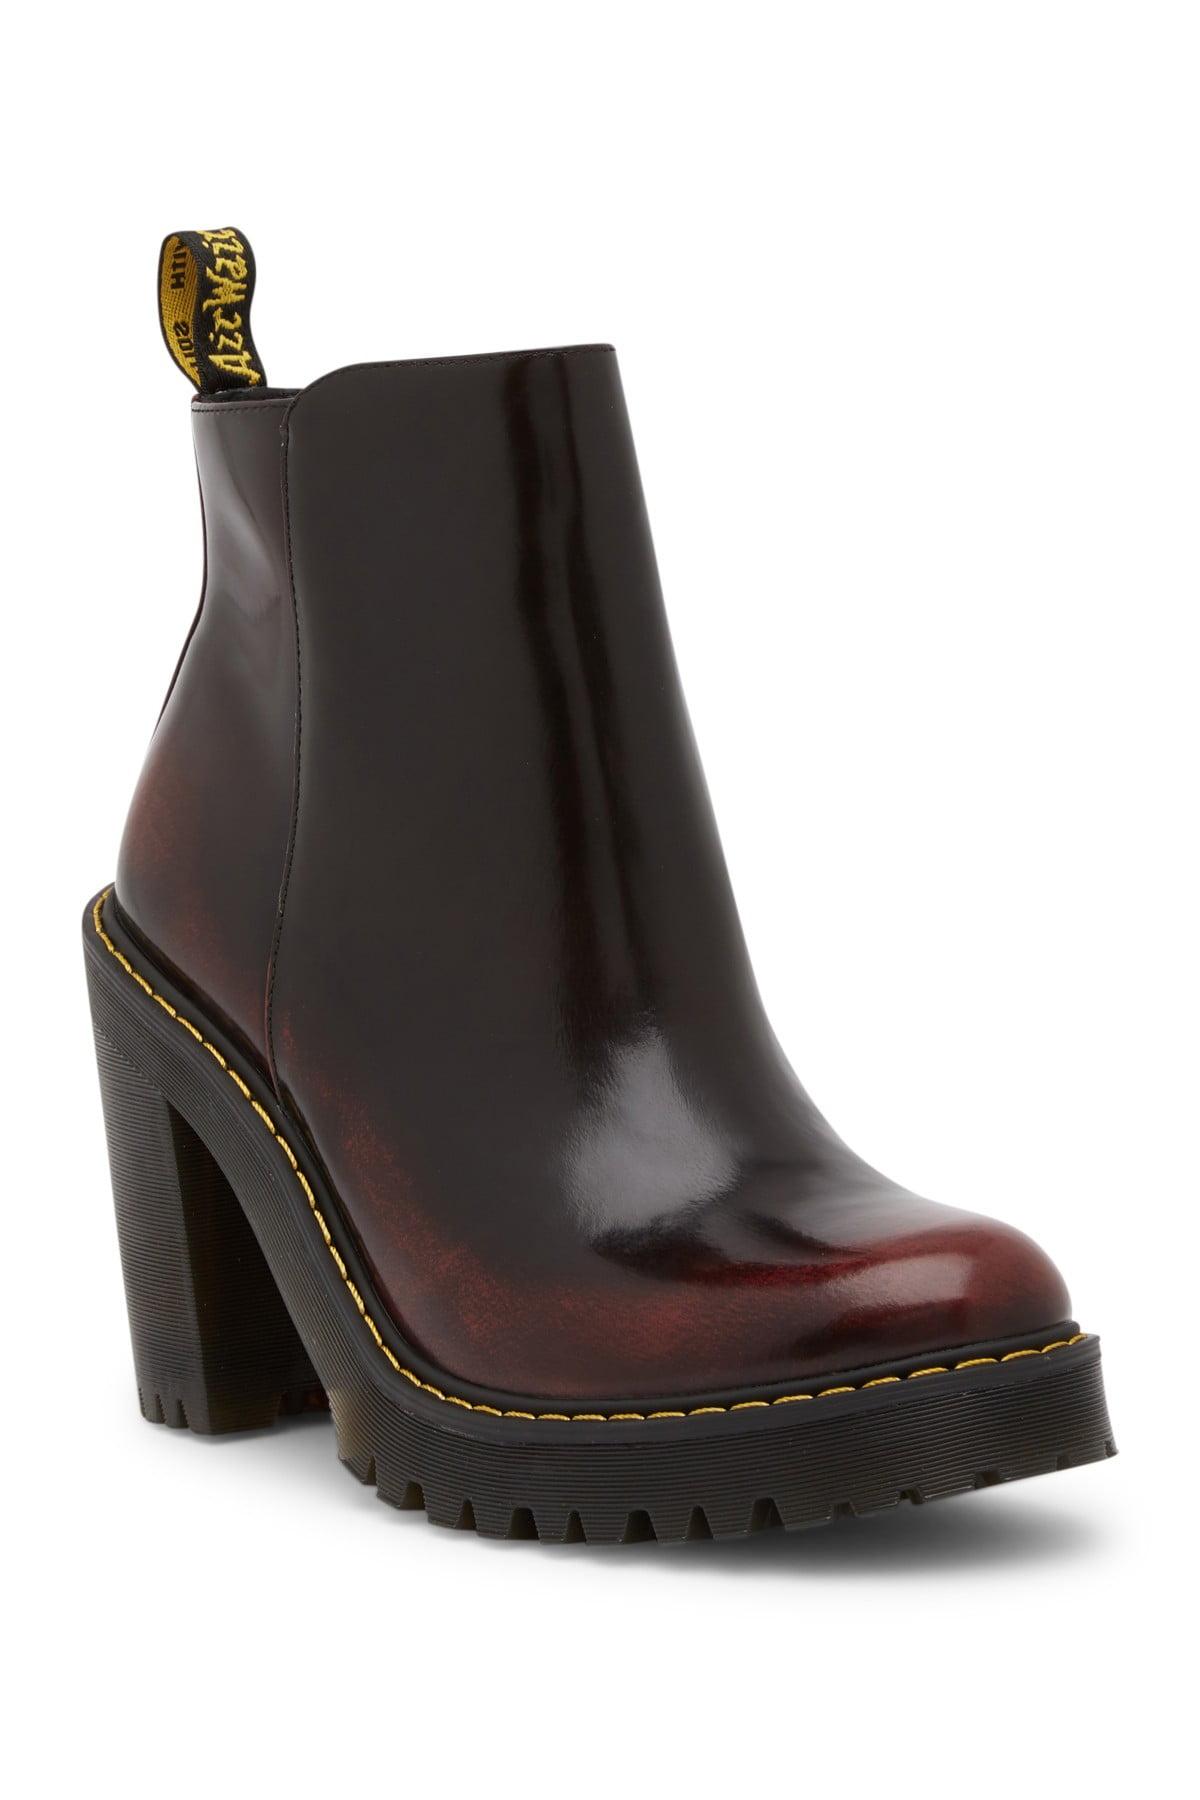 Dr. Martens Leather Magdalena Boot in Cherry Red (Black) - Lyst